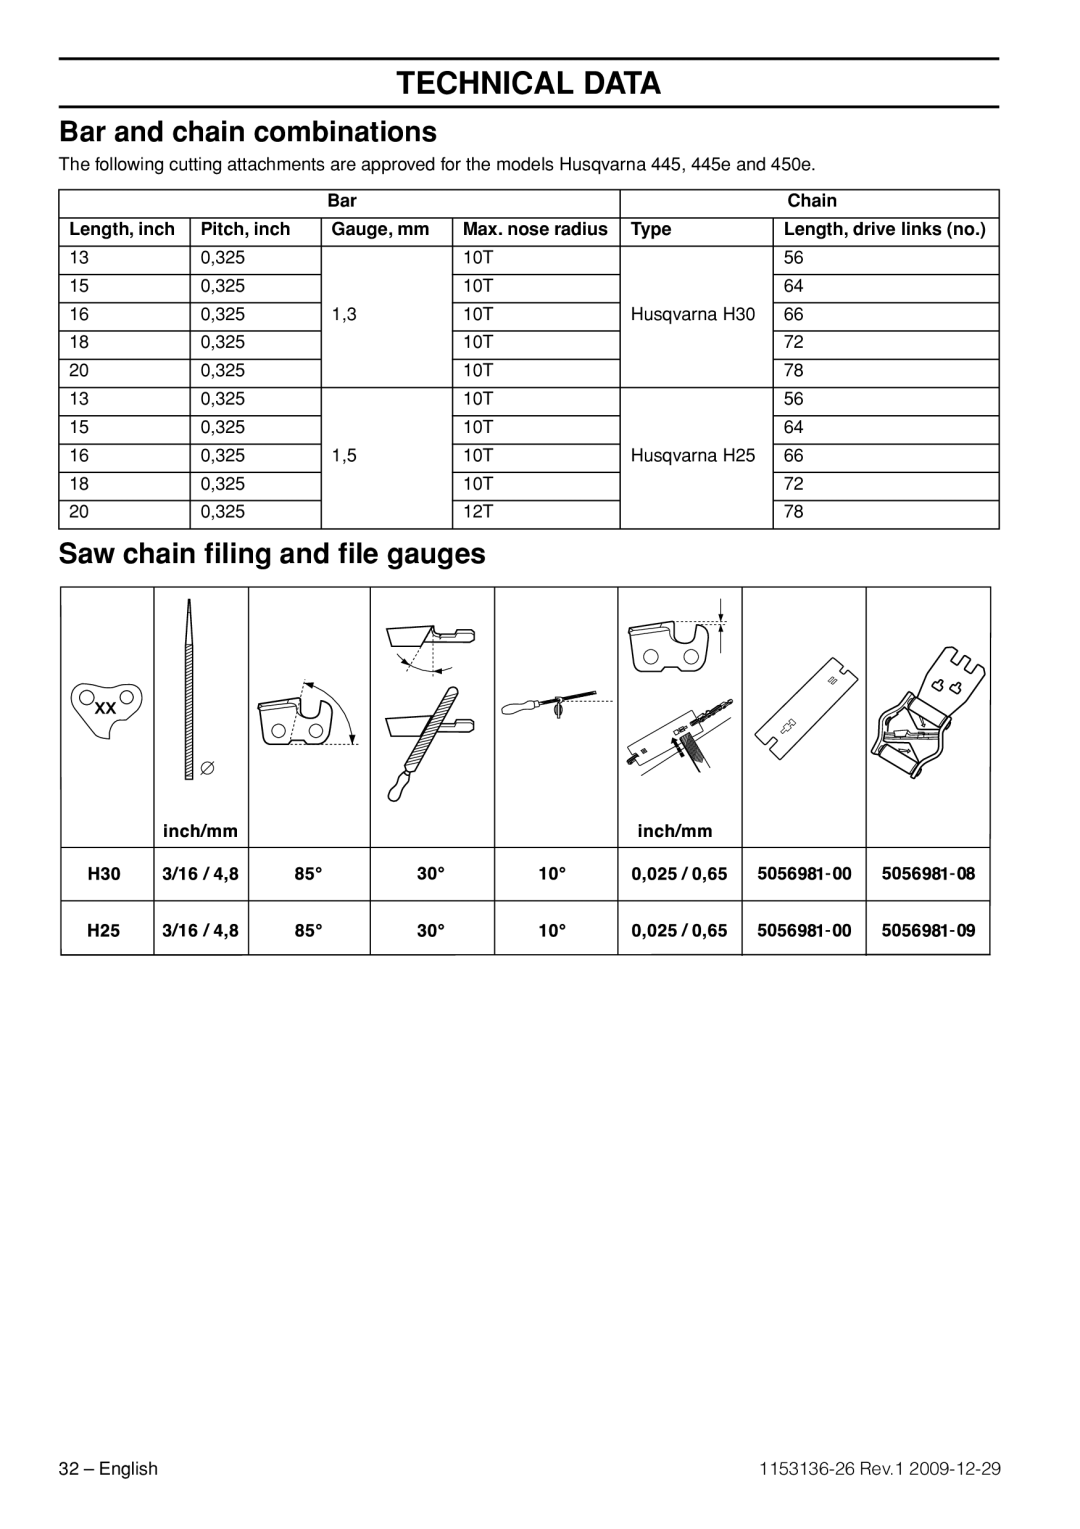 Husqvarna 1153136-26 manual Bar and chain combinations, Saw chain ﬁling and ﬁle gauges, Technical Data 